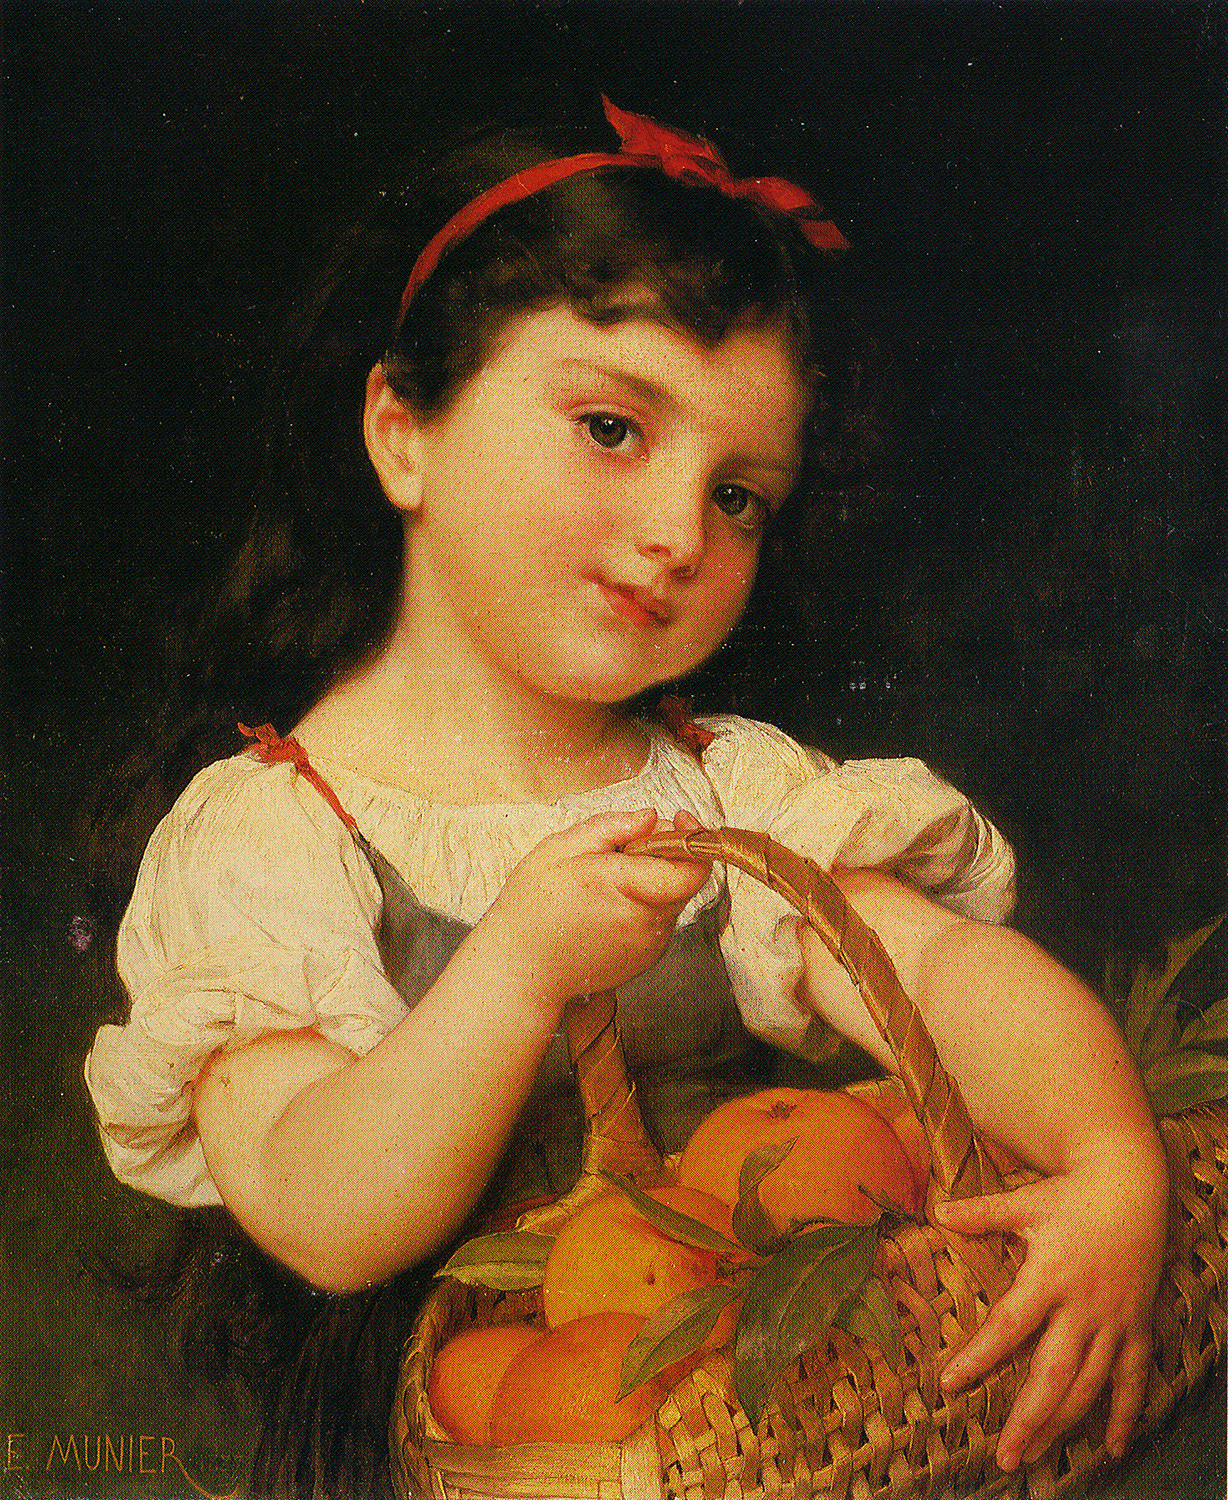 Young Girl with a Basket of Oranges - Emile Munier